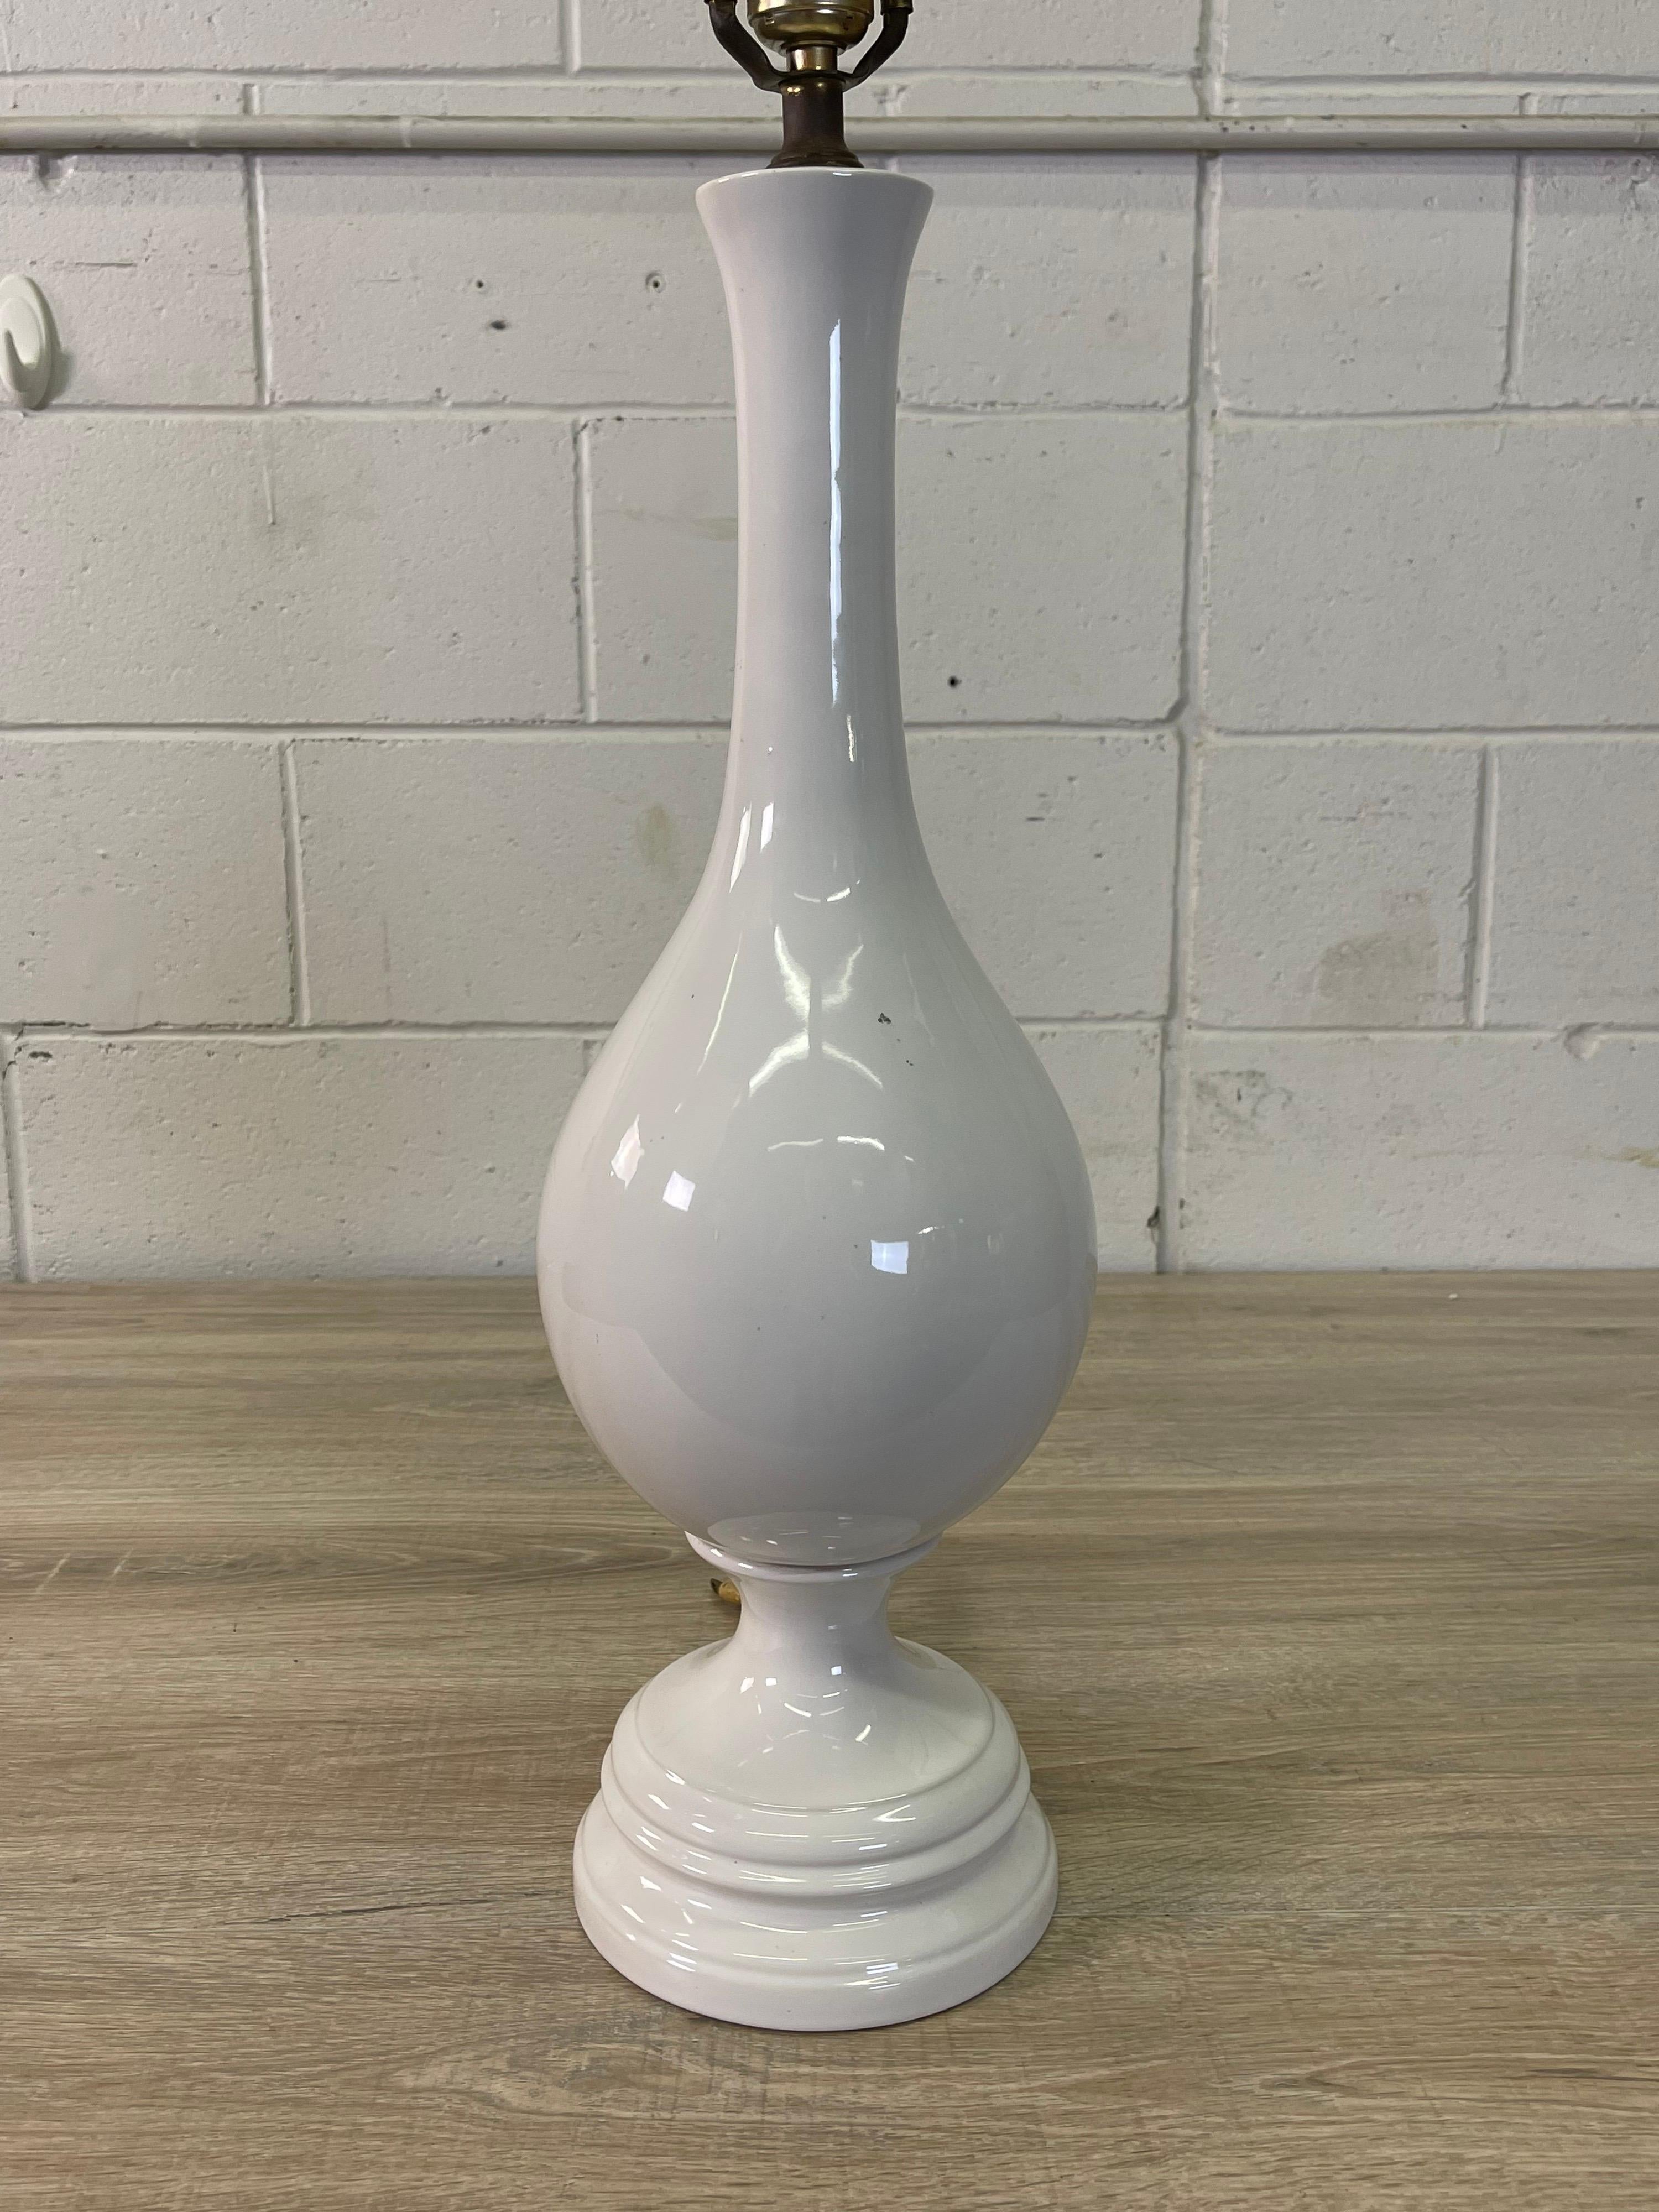 Vintage 1960s tall white ceramic table lamp. Wired for the US and in working condition. Lamp uses a standard 100 watt bulb. Harp, 4.5” Diameter x 10” Height. Socket, 25”H. No marks.